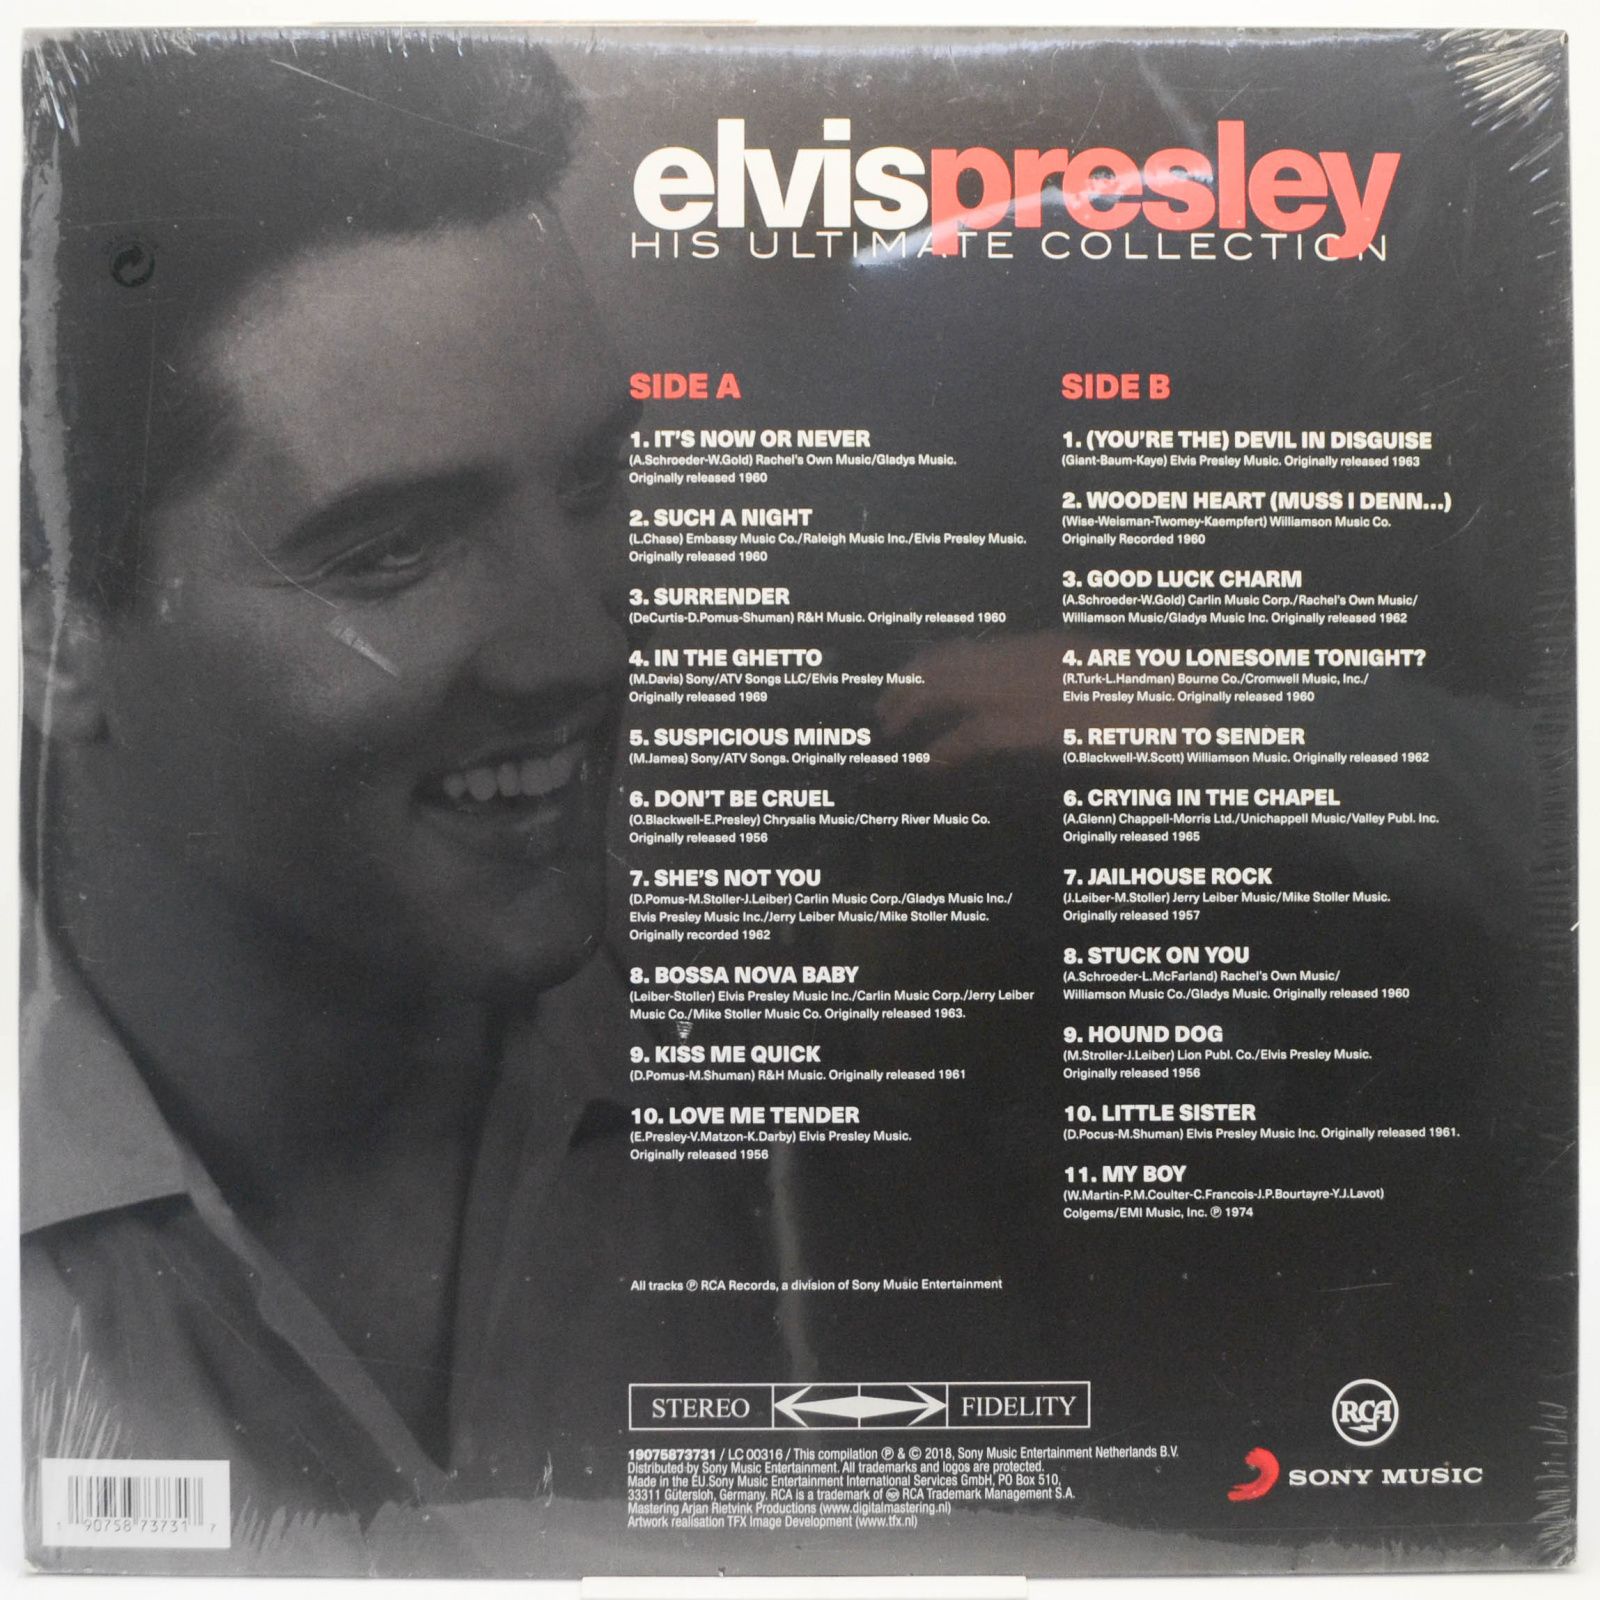 Elvis Presley — His Ultimate Collection, 2018